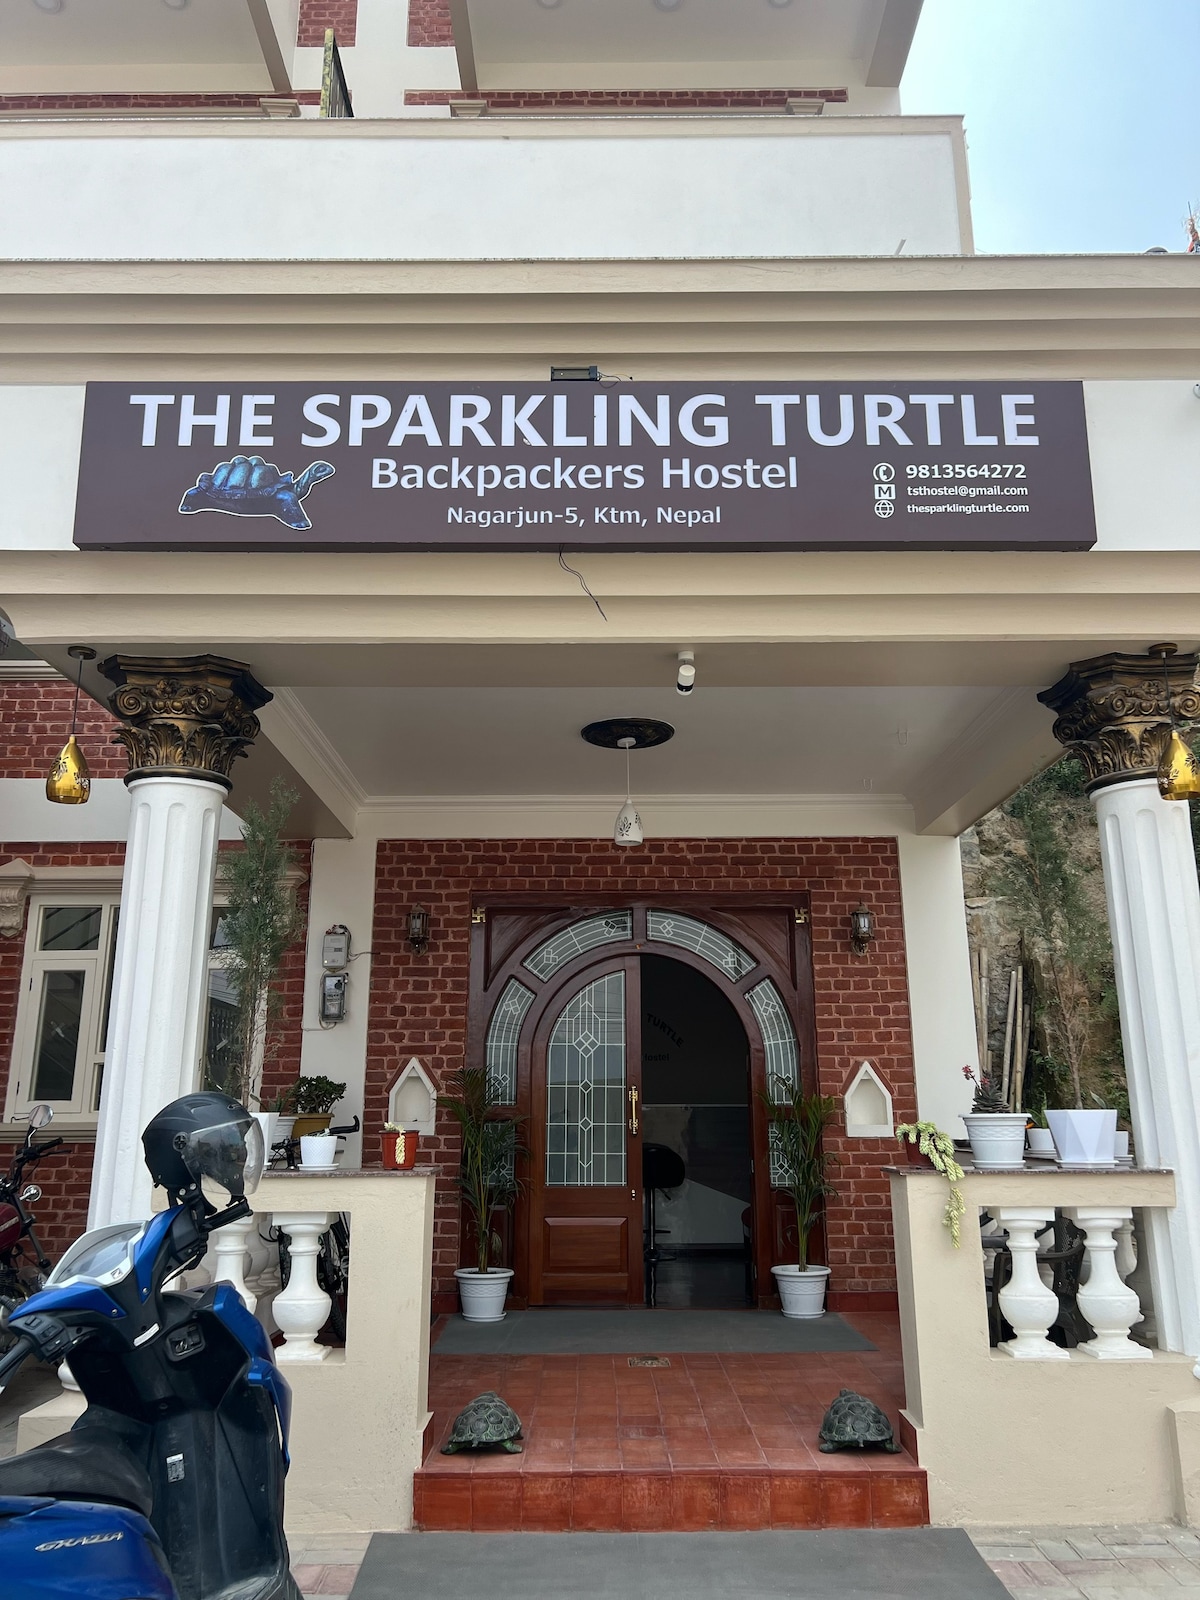 The Sparkling Turtle.